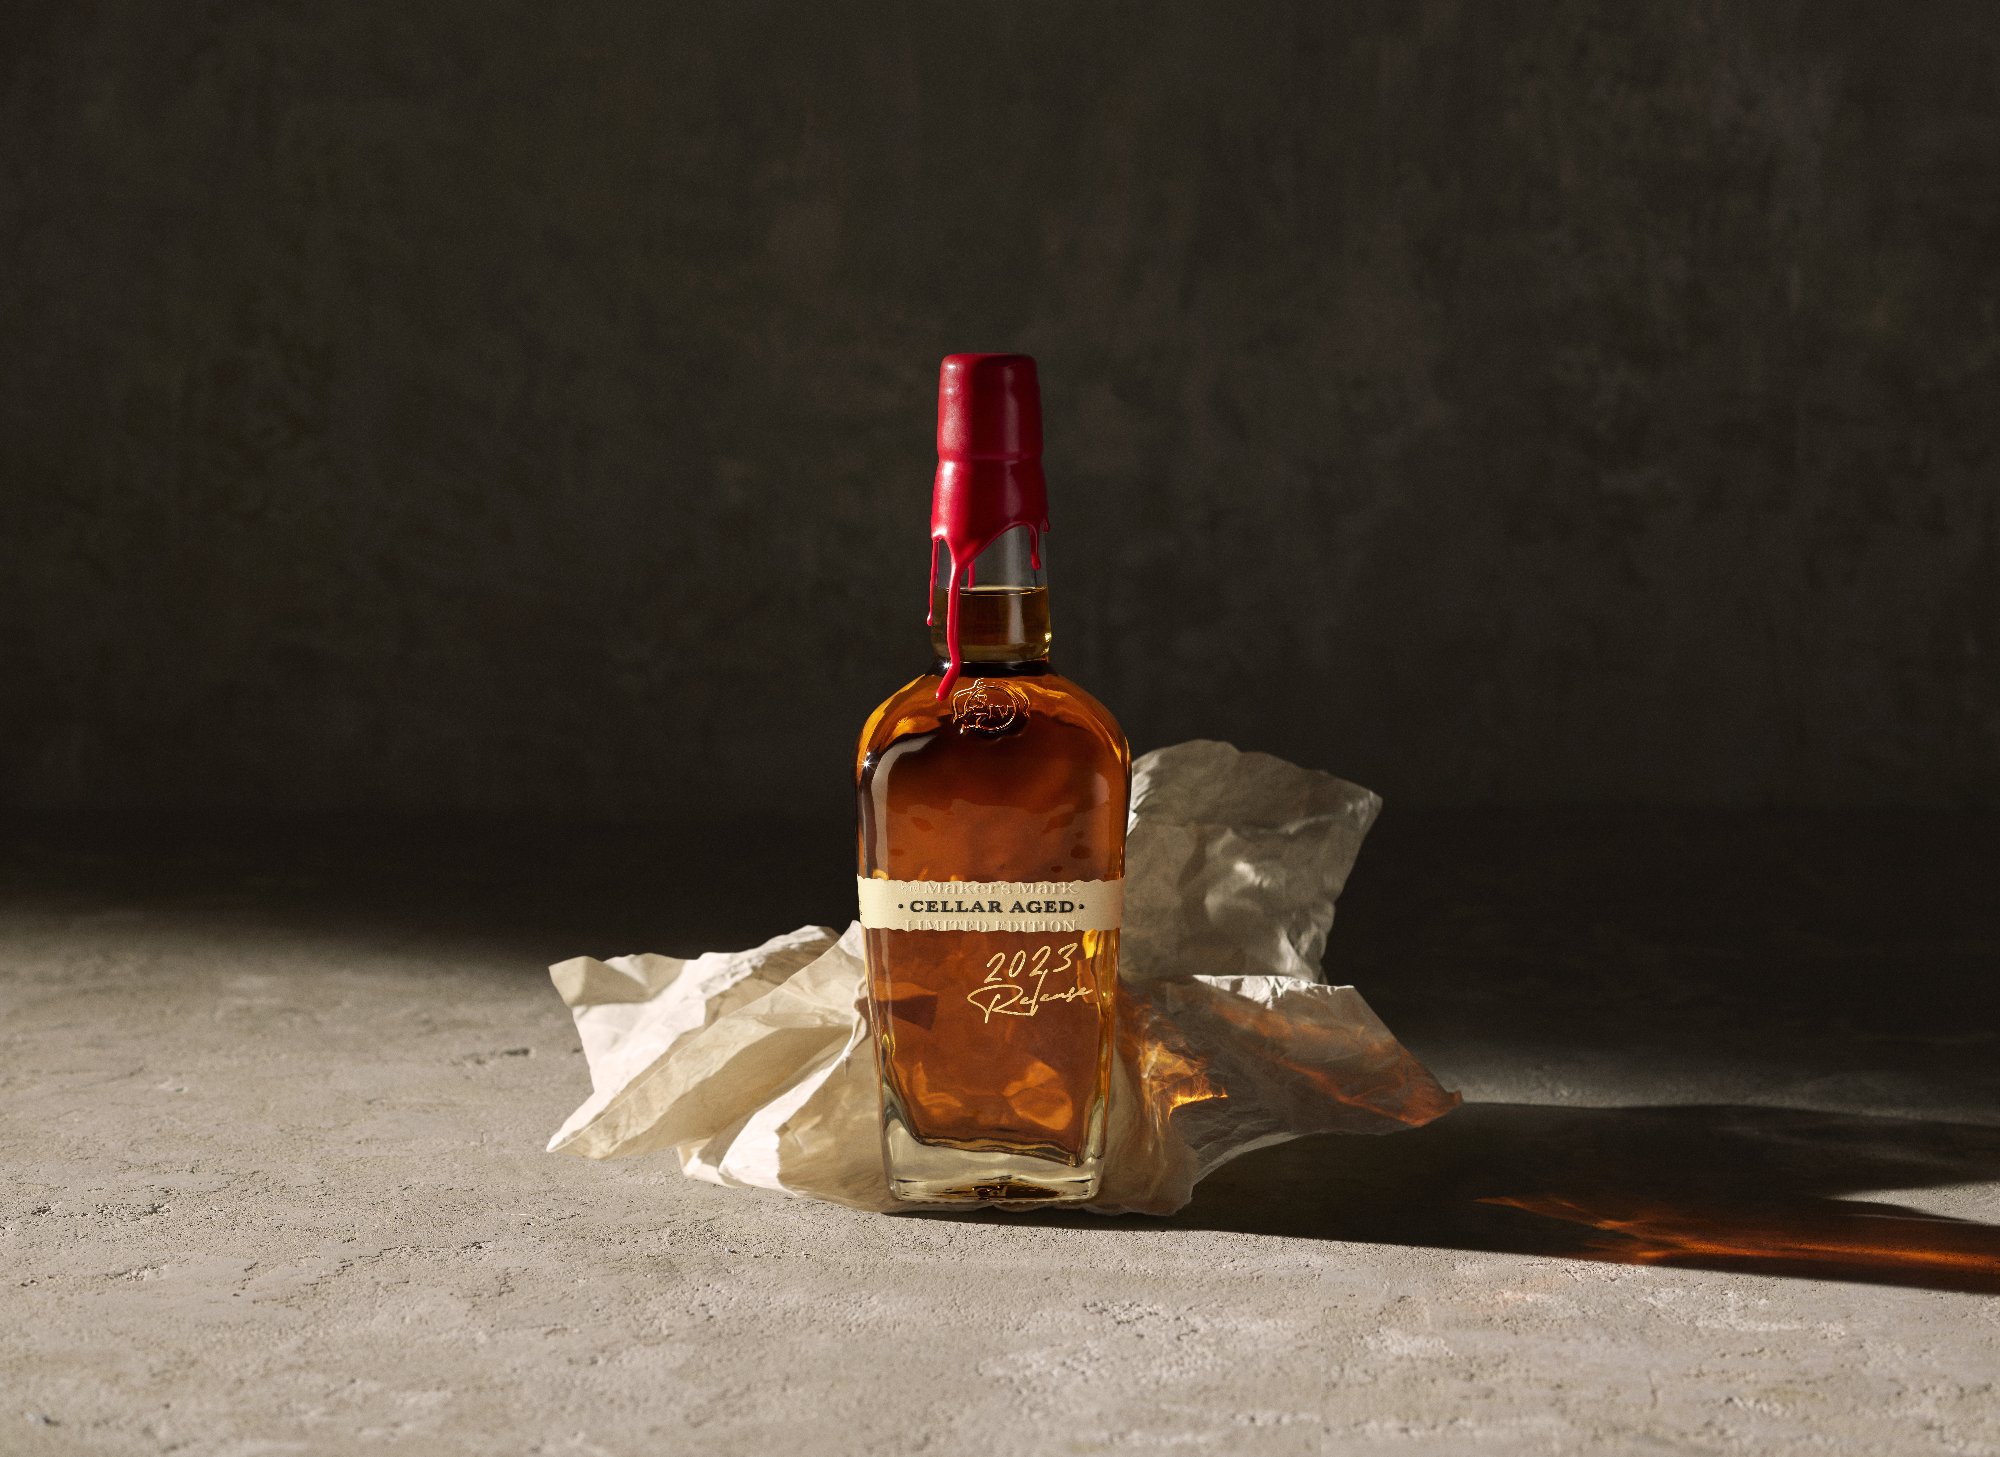 Fall Bourbon (and Rye) Releases You Don't Want to Miss (2023)